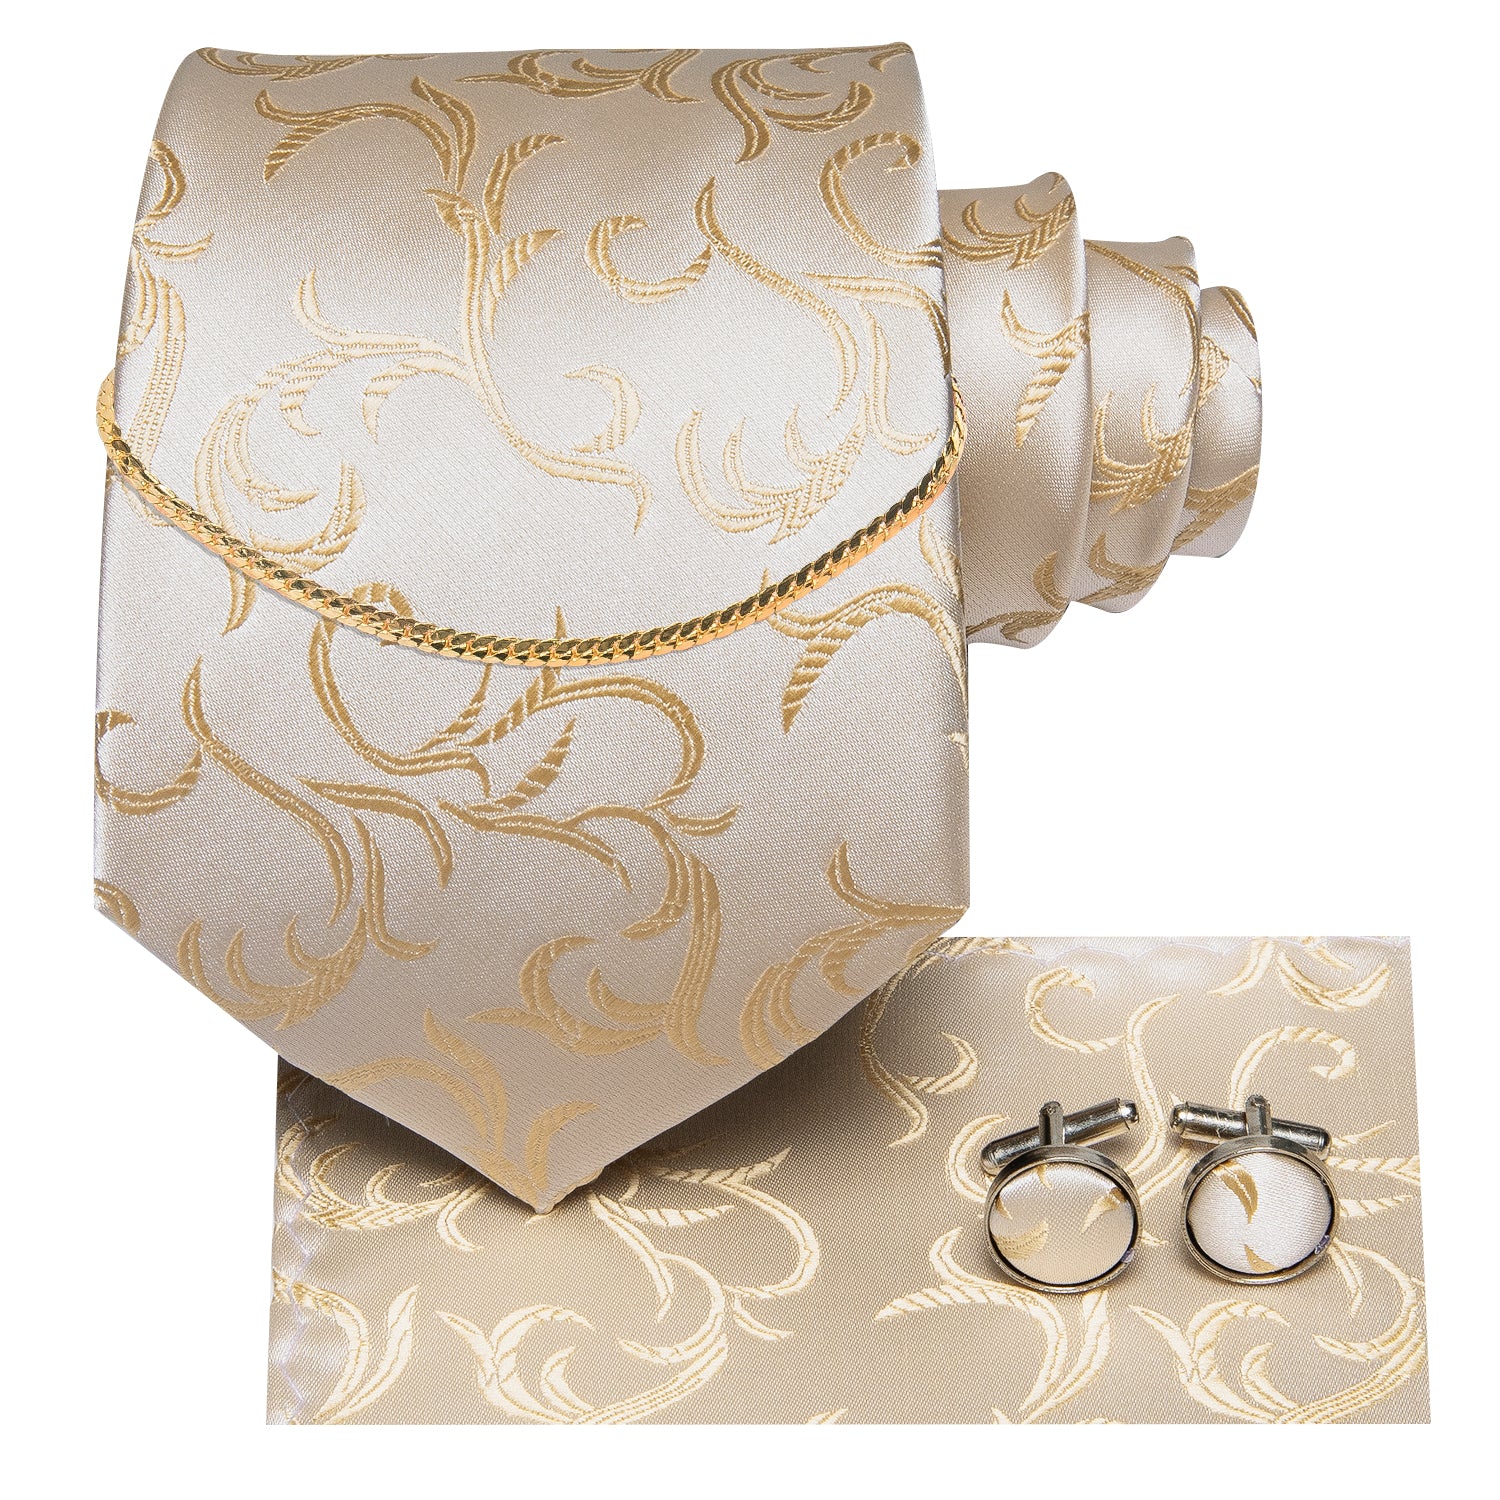 Champagne Silver Floral Tie Pocket Square Cufflinks Set With Golden Chain